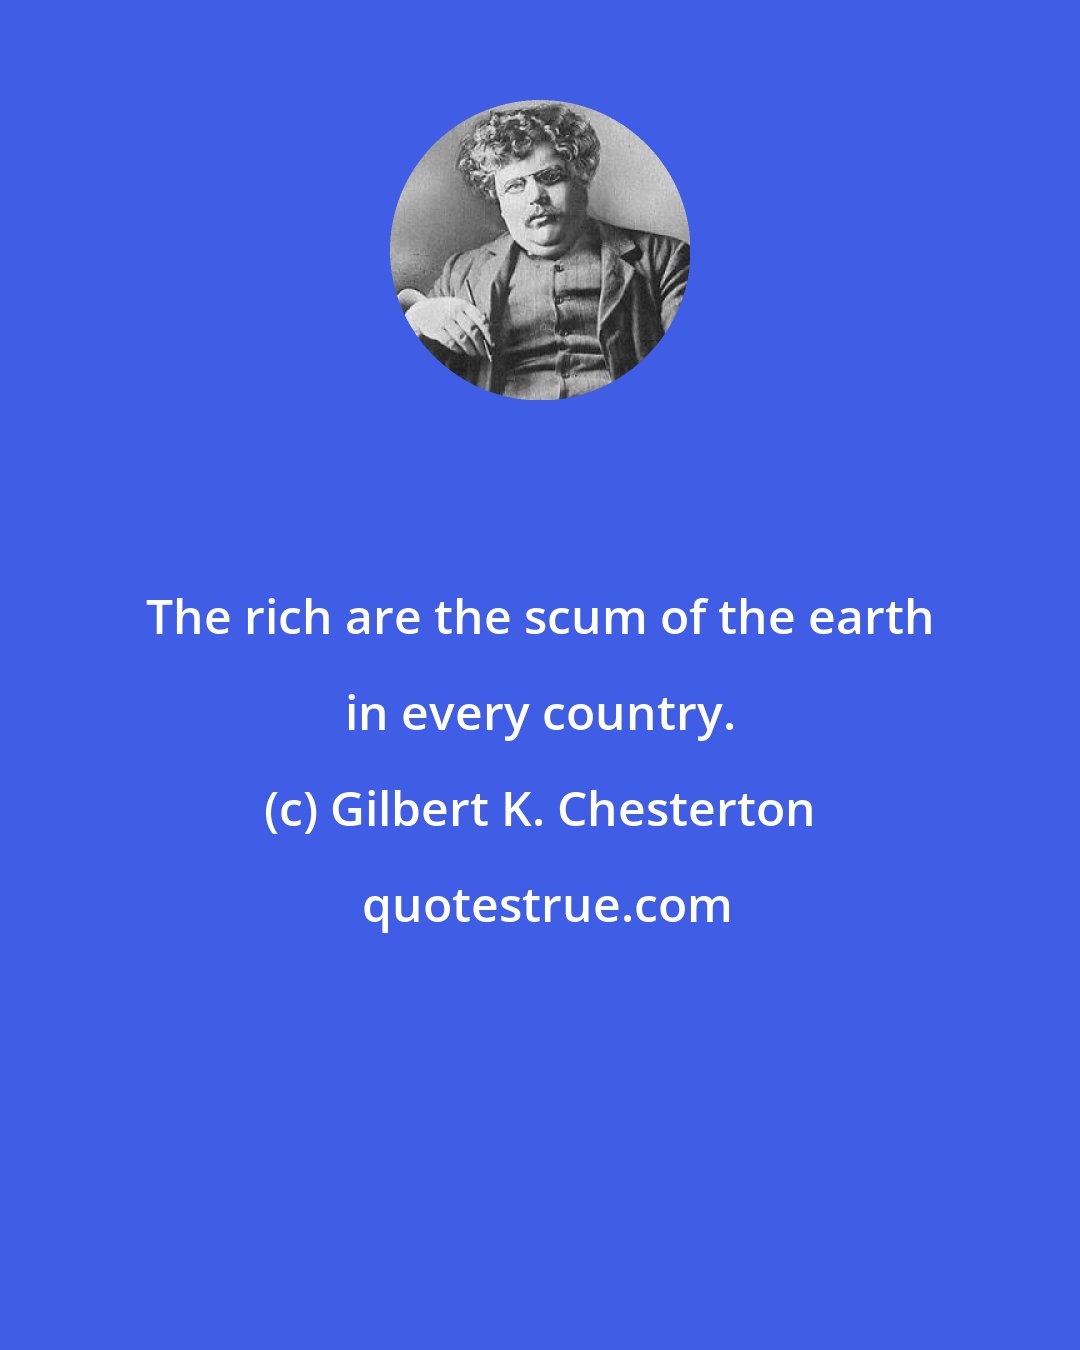 Gilbert K. Chesterton: The rich are the scum of the earth in every country.